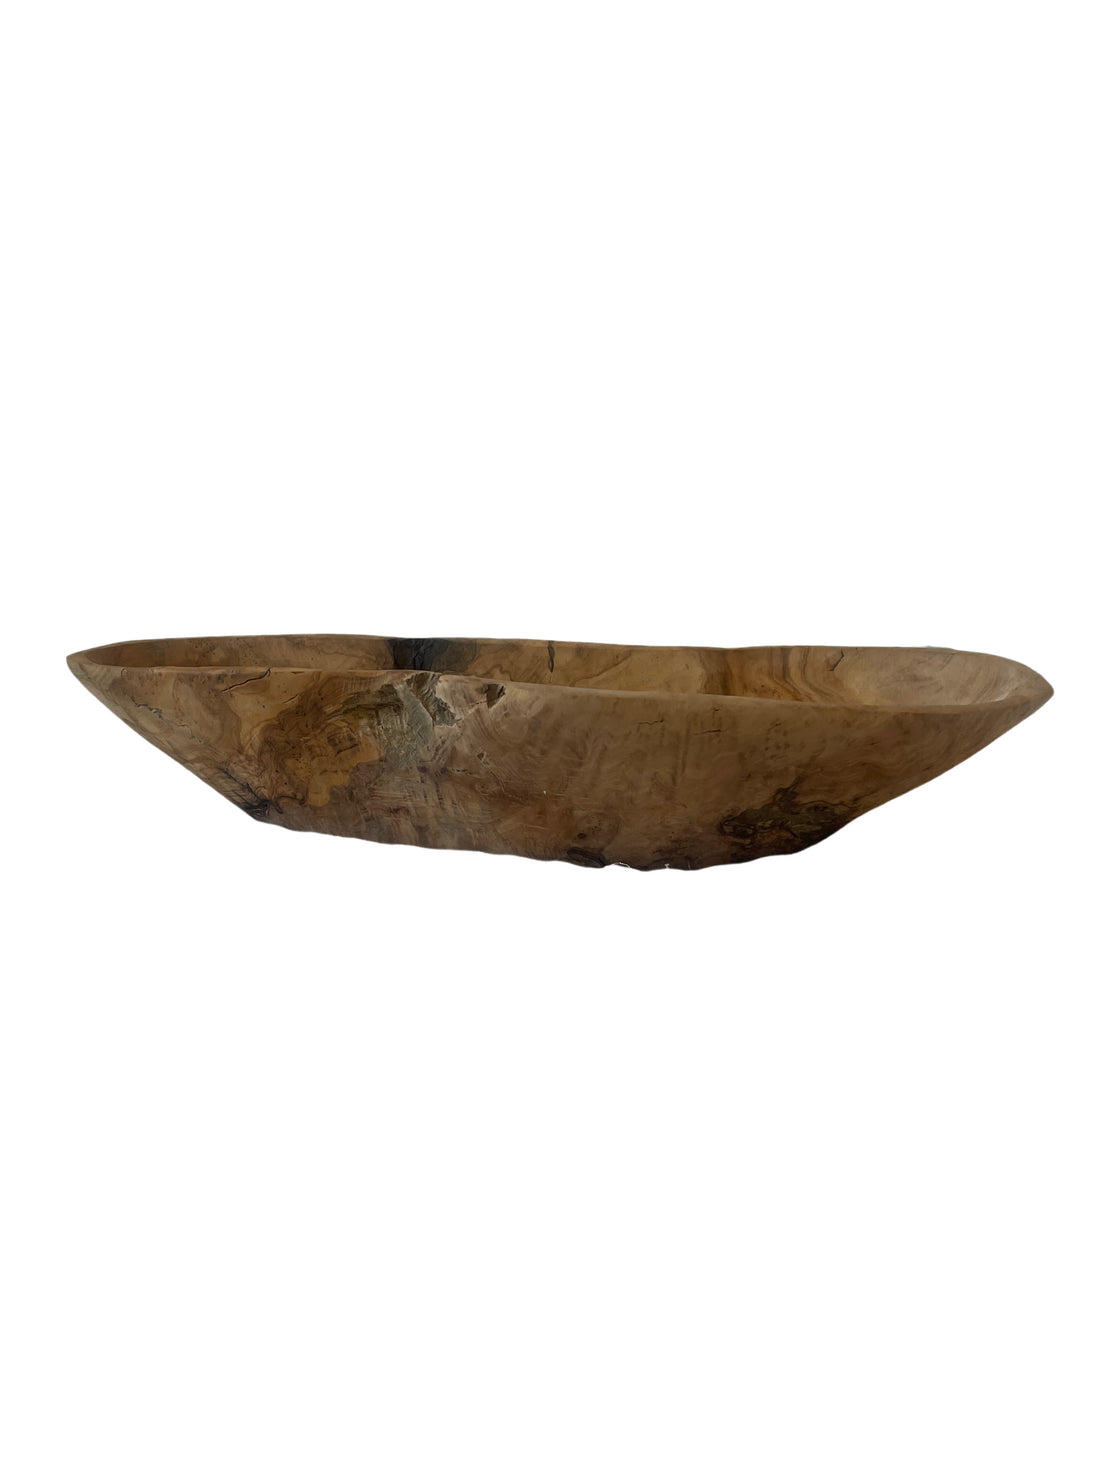 Handcrafted wood bowl